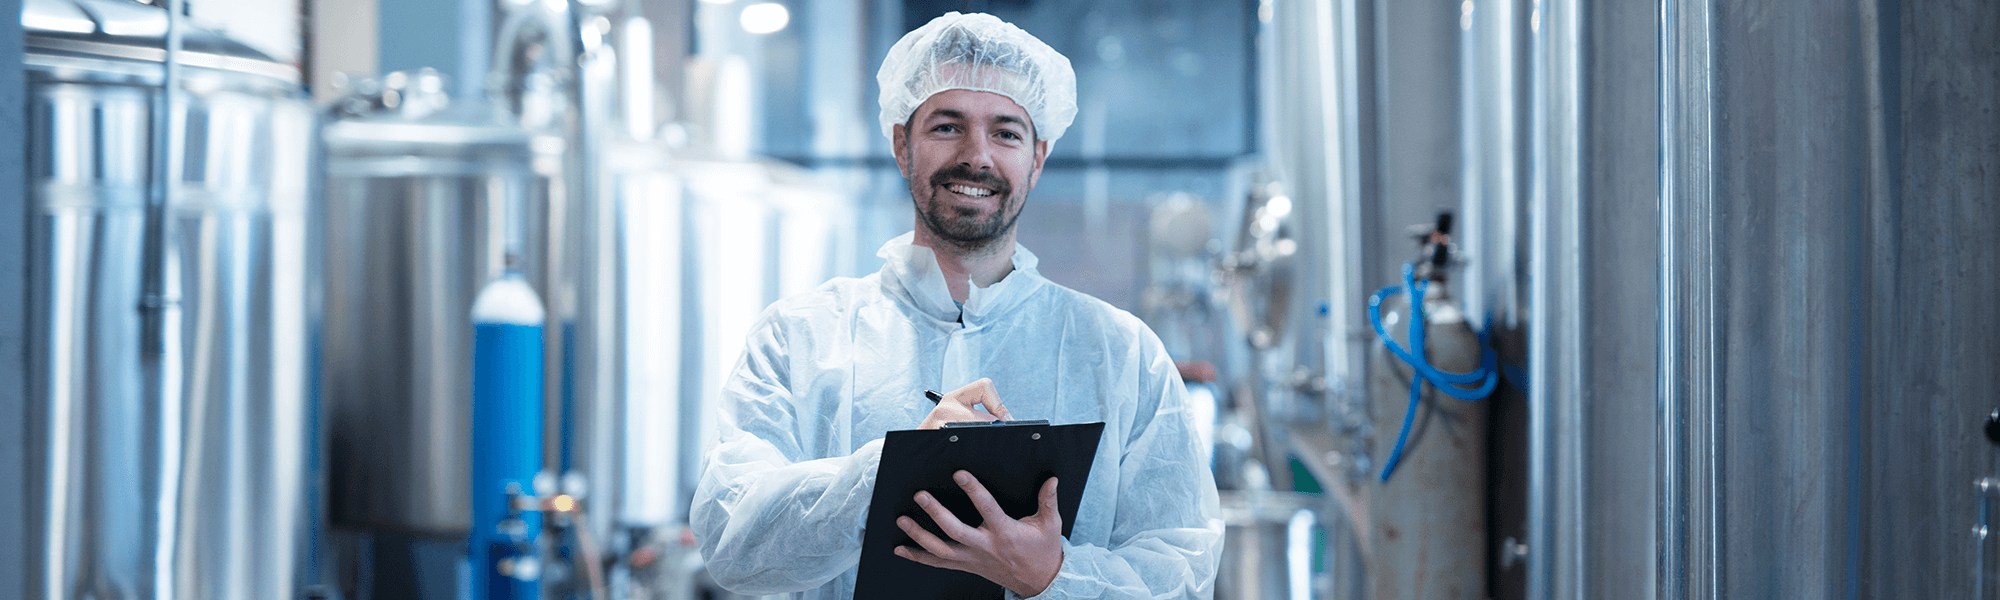 Photograph of Food Process Worker